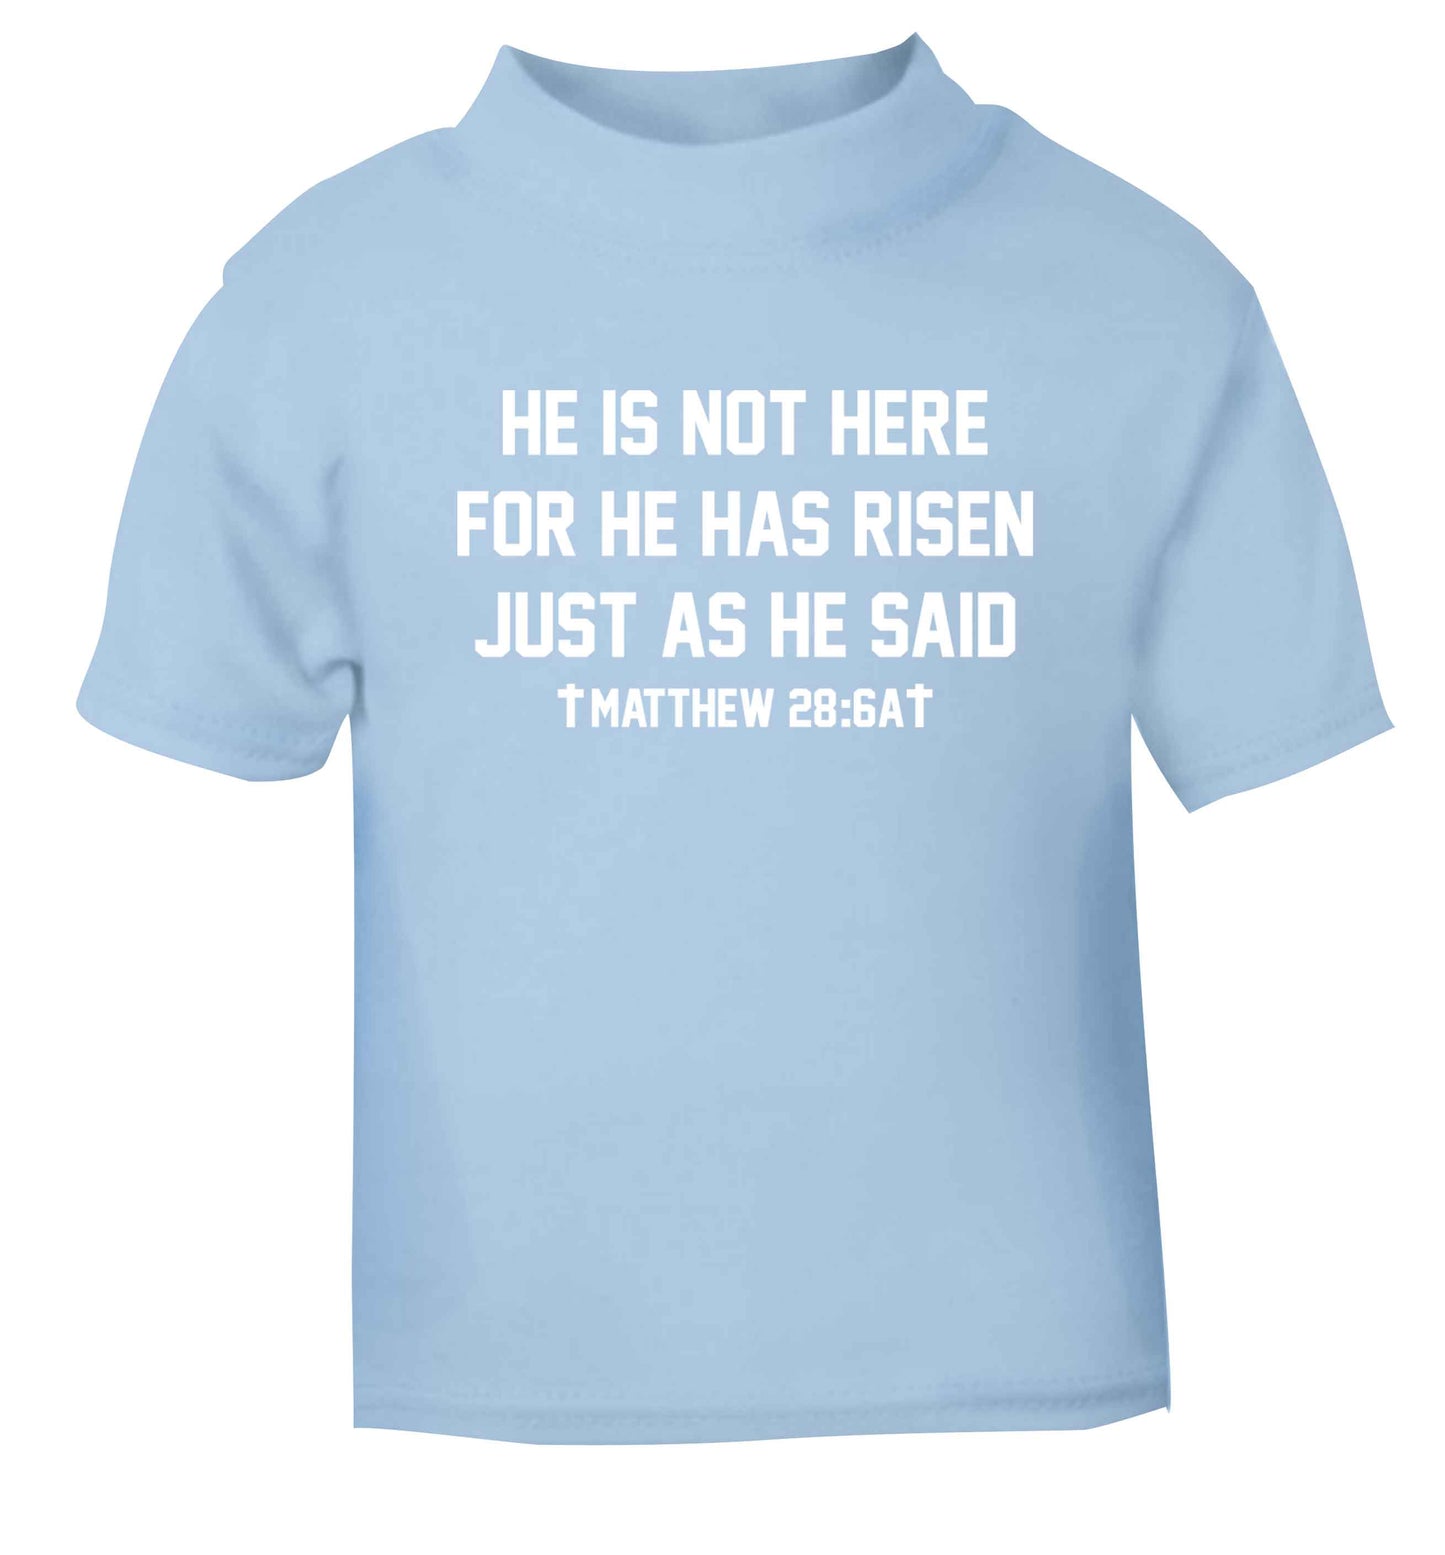 He is not here for he has risen just as he said matthew 28:6A light blue baby toddler Tshirt 2 Years